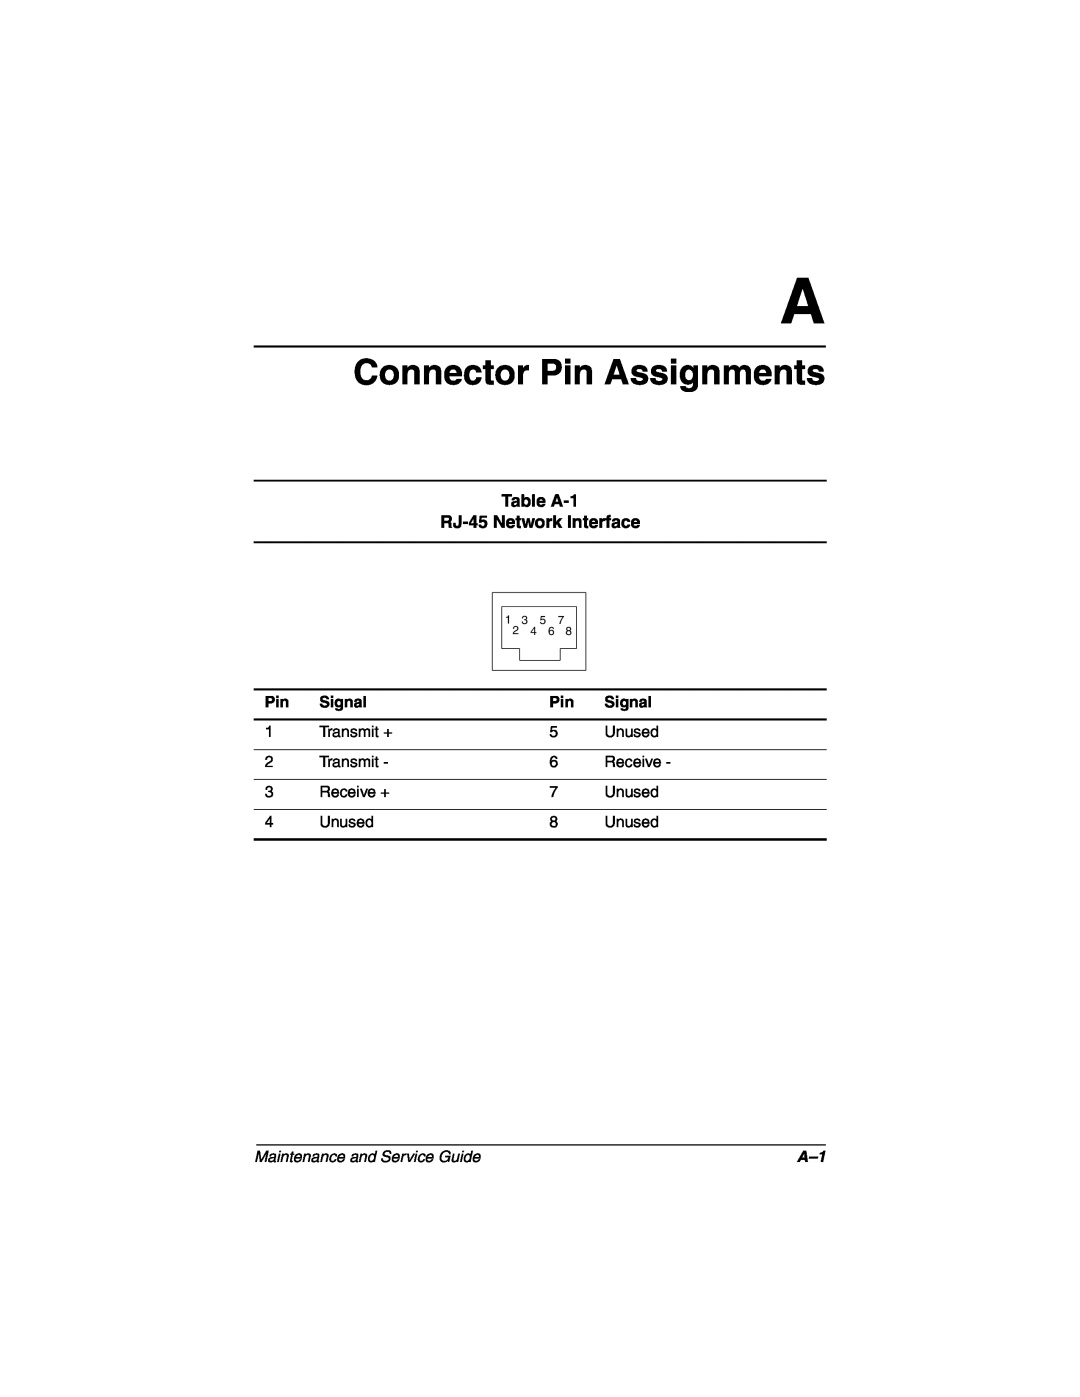 Compaq N160 manual Connector Pin Assignments, Table A-1 RJ-45 Network Interface, Maintenance and Service Guide 